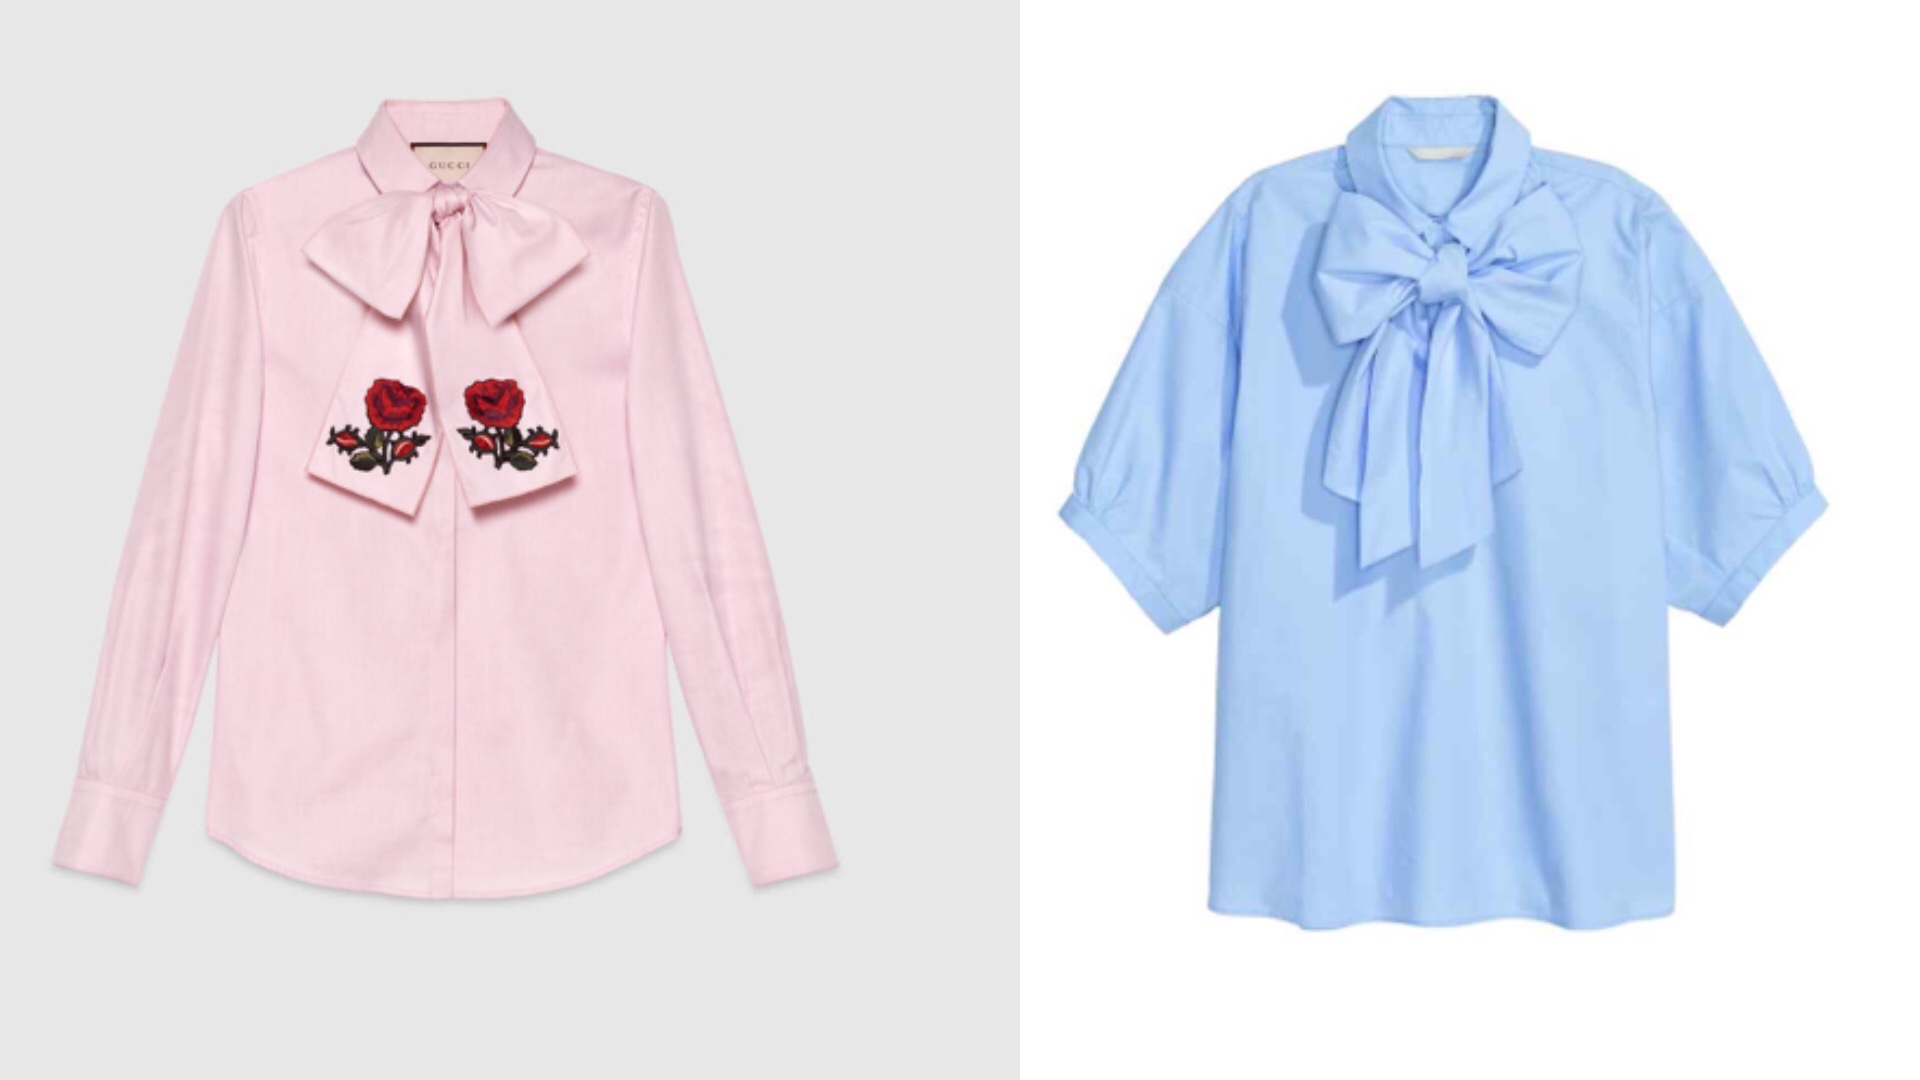 Gucci and HM pussy bow blouse